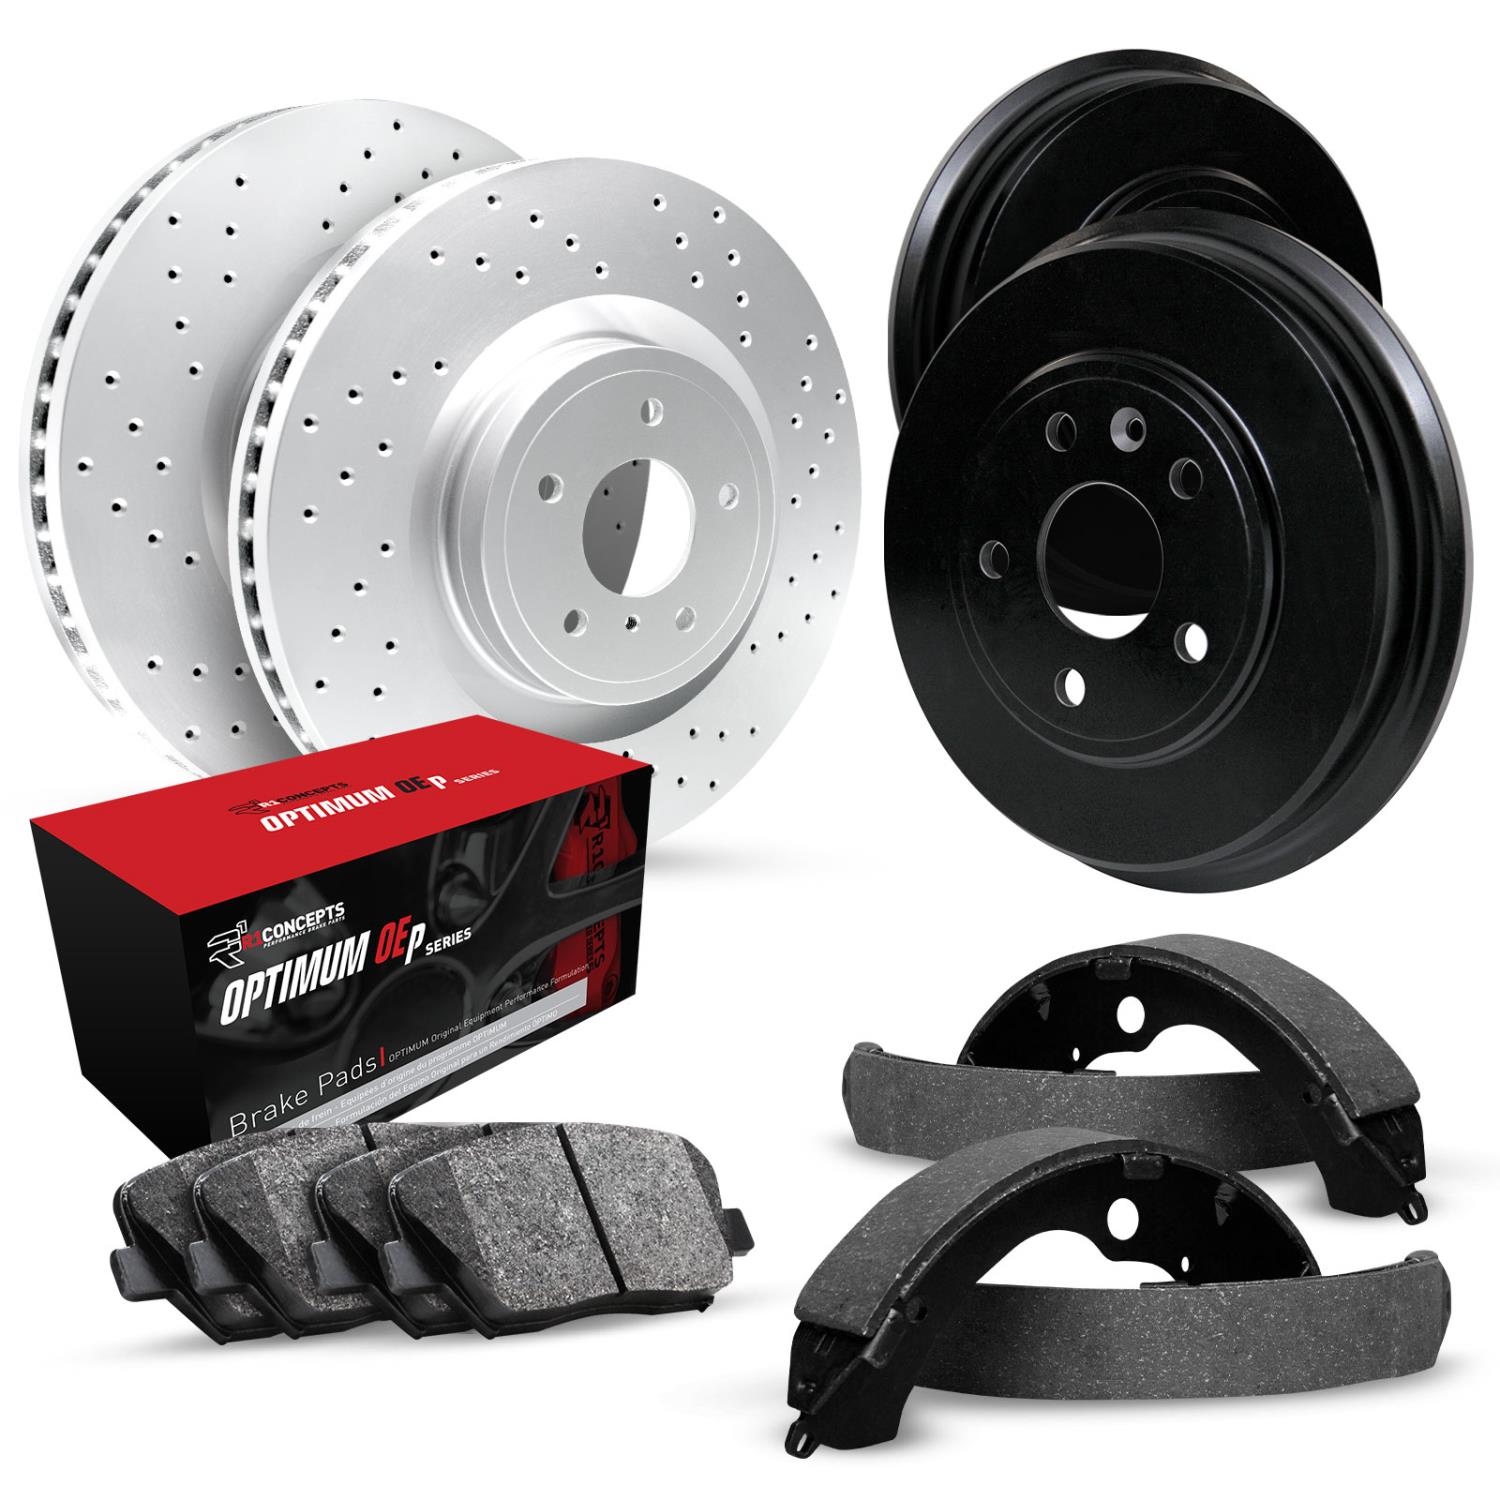 GEO-Carbon Drilled Brake Rotor & Drum Set w/Optimum OE Pads & Shoes, 1992-2002 GM, Position: Front & Rear